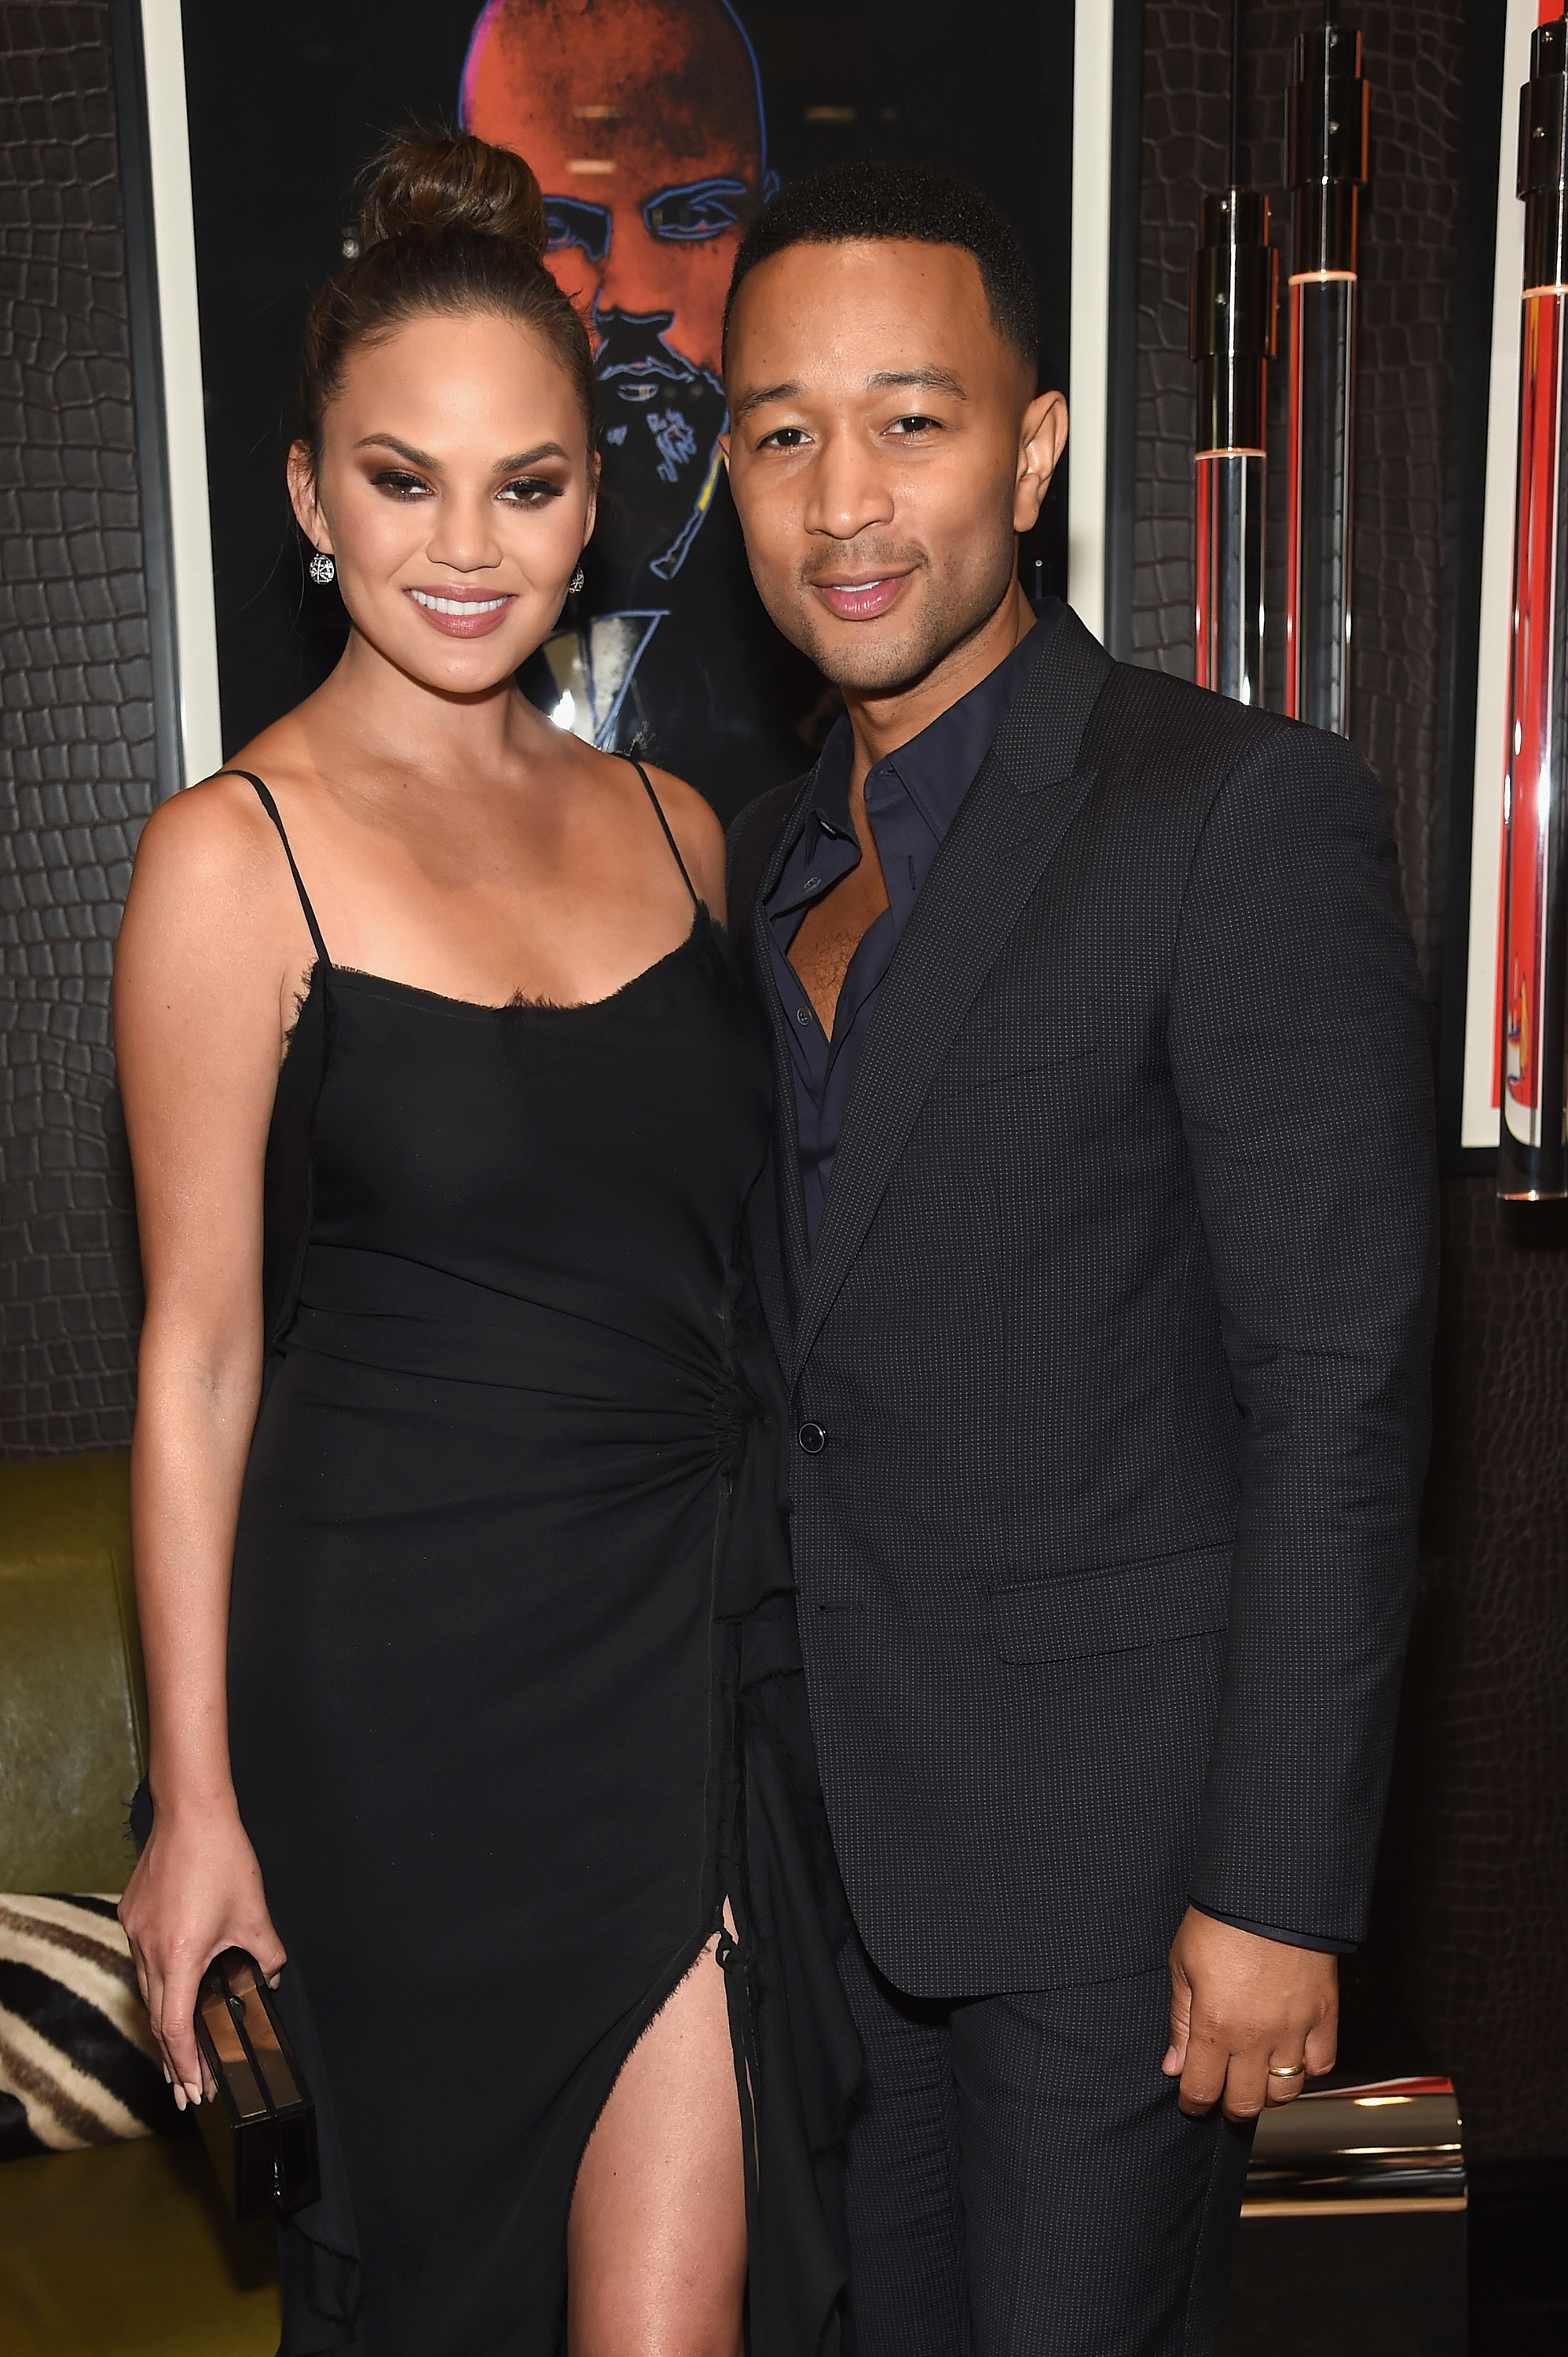 John Legends Wife, Chrissy Teigen 5 Fast Facts You Need to Know Heavy